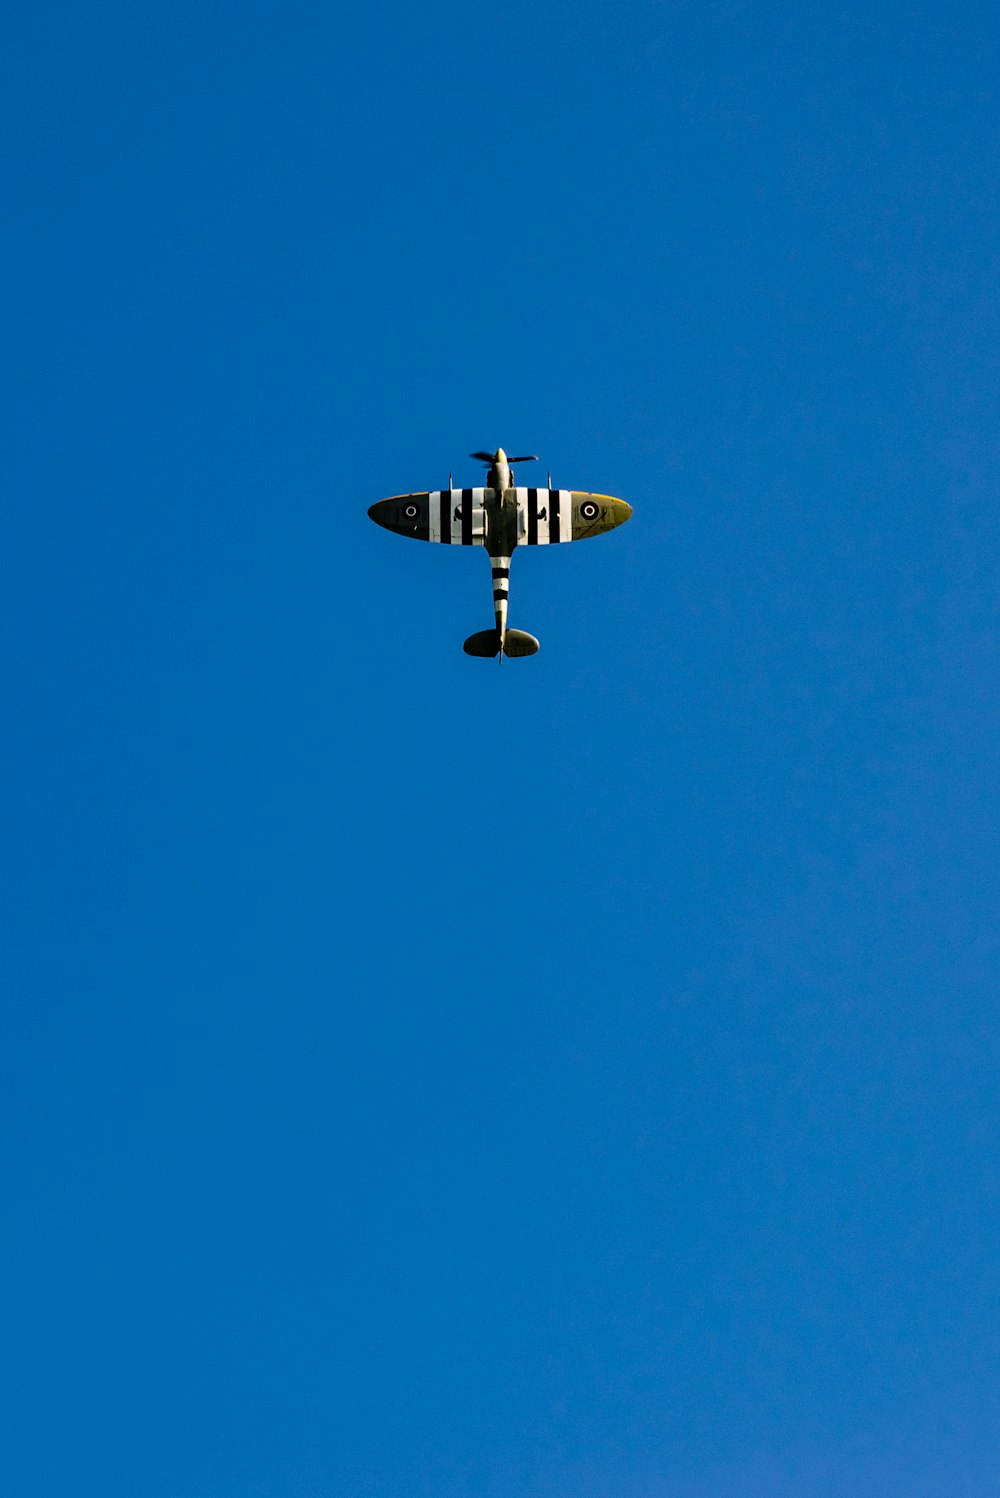 gray and white airplane under blue sky